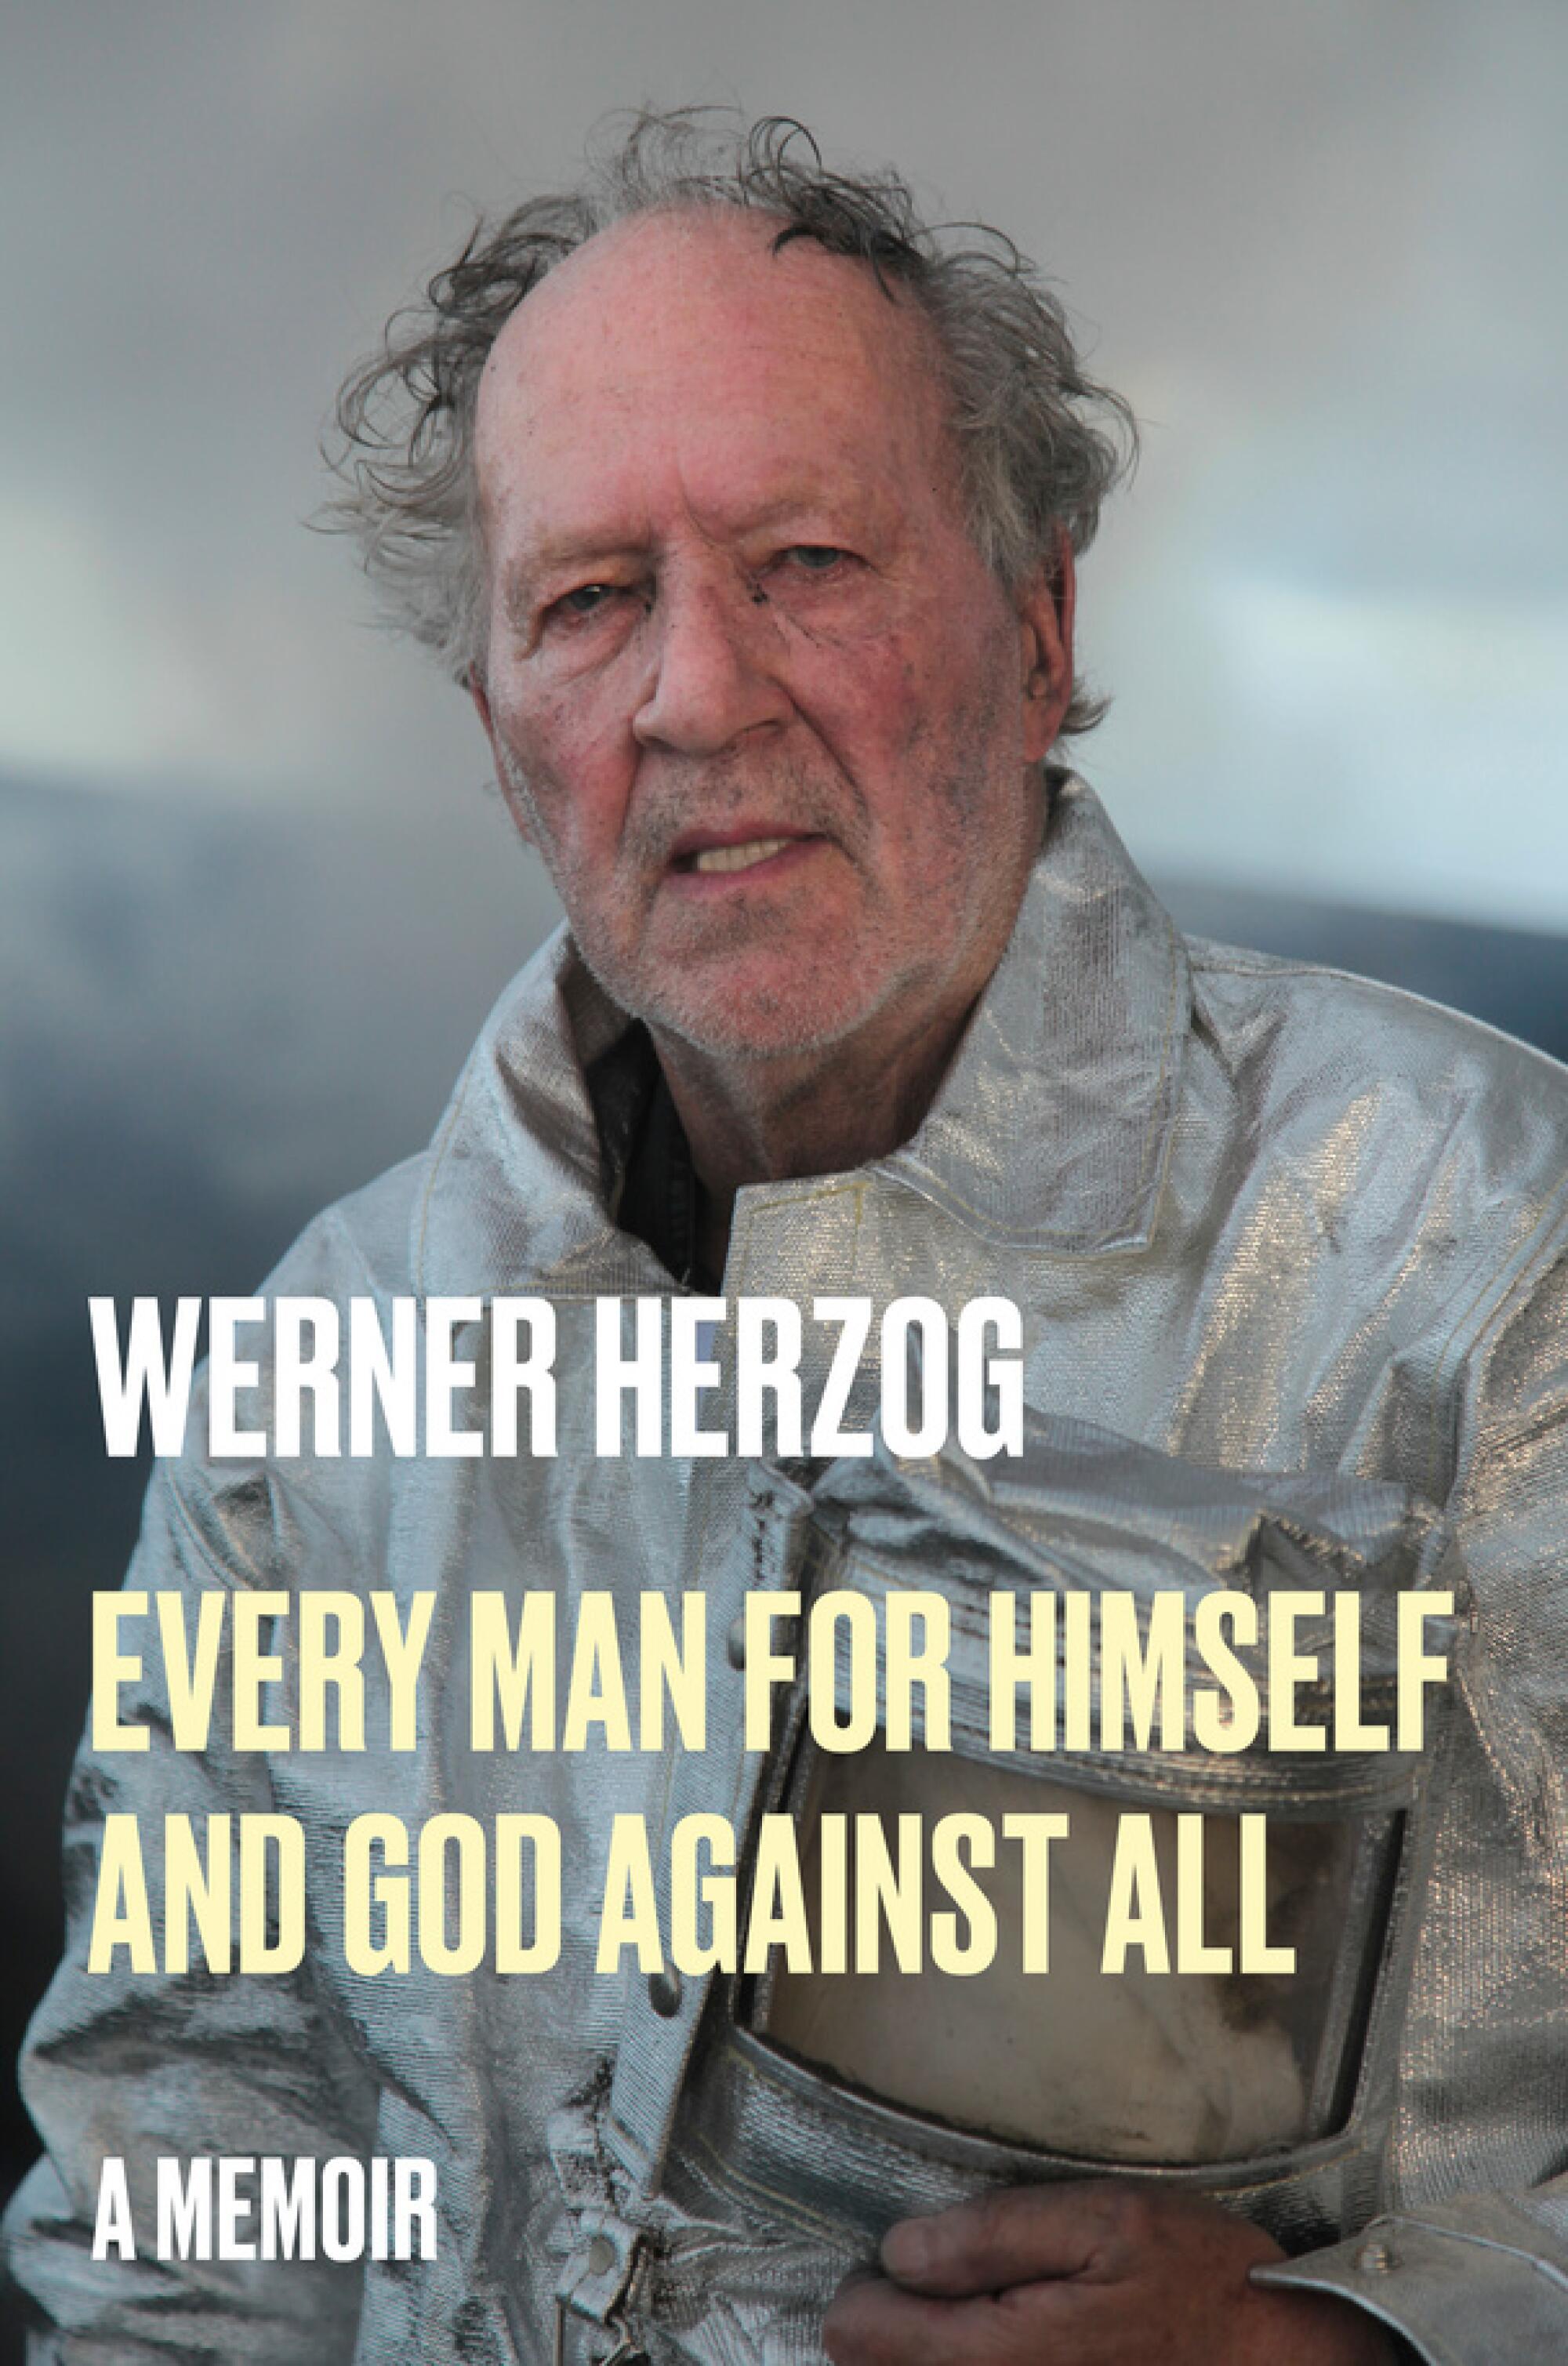 Book cover of "Every Man For Himself and God Against All" by Werner Herzog